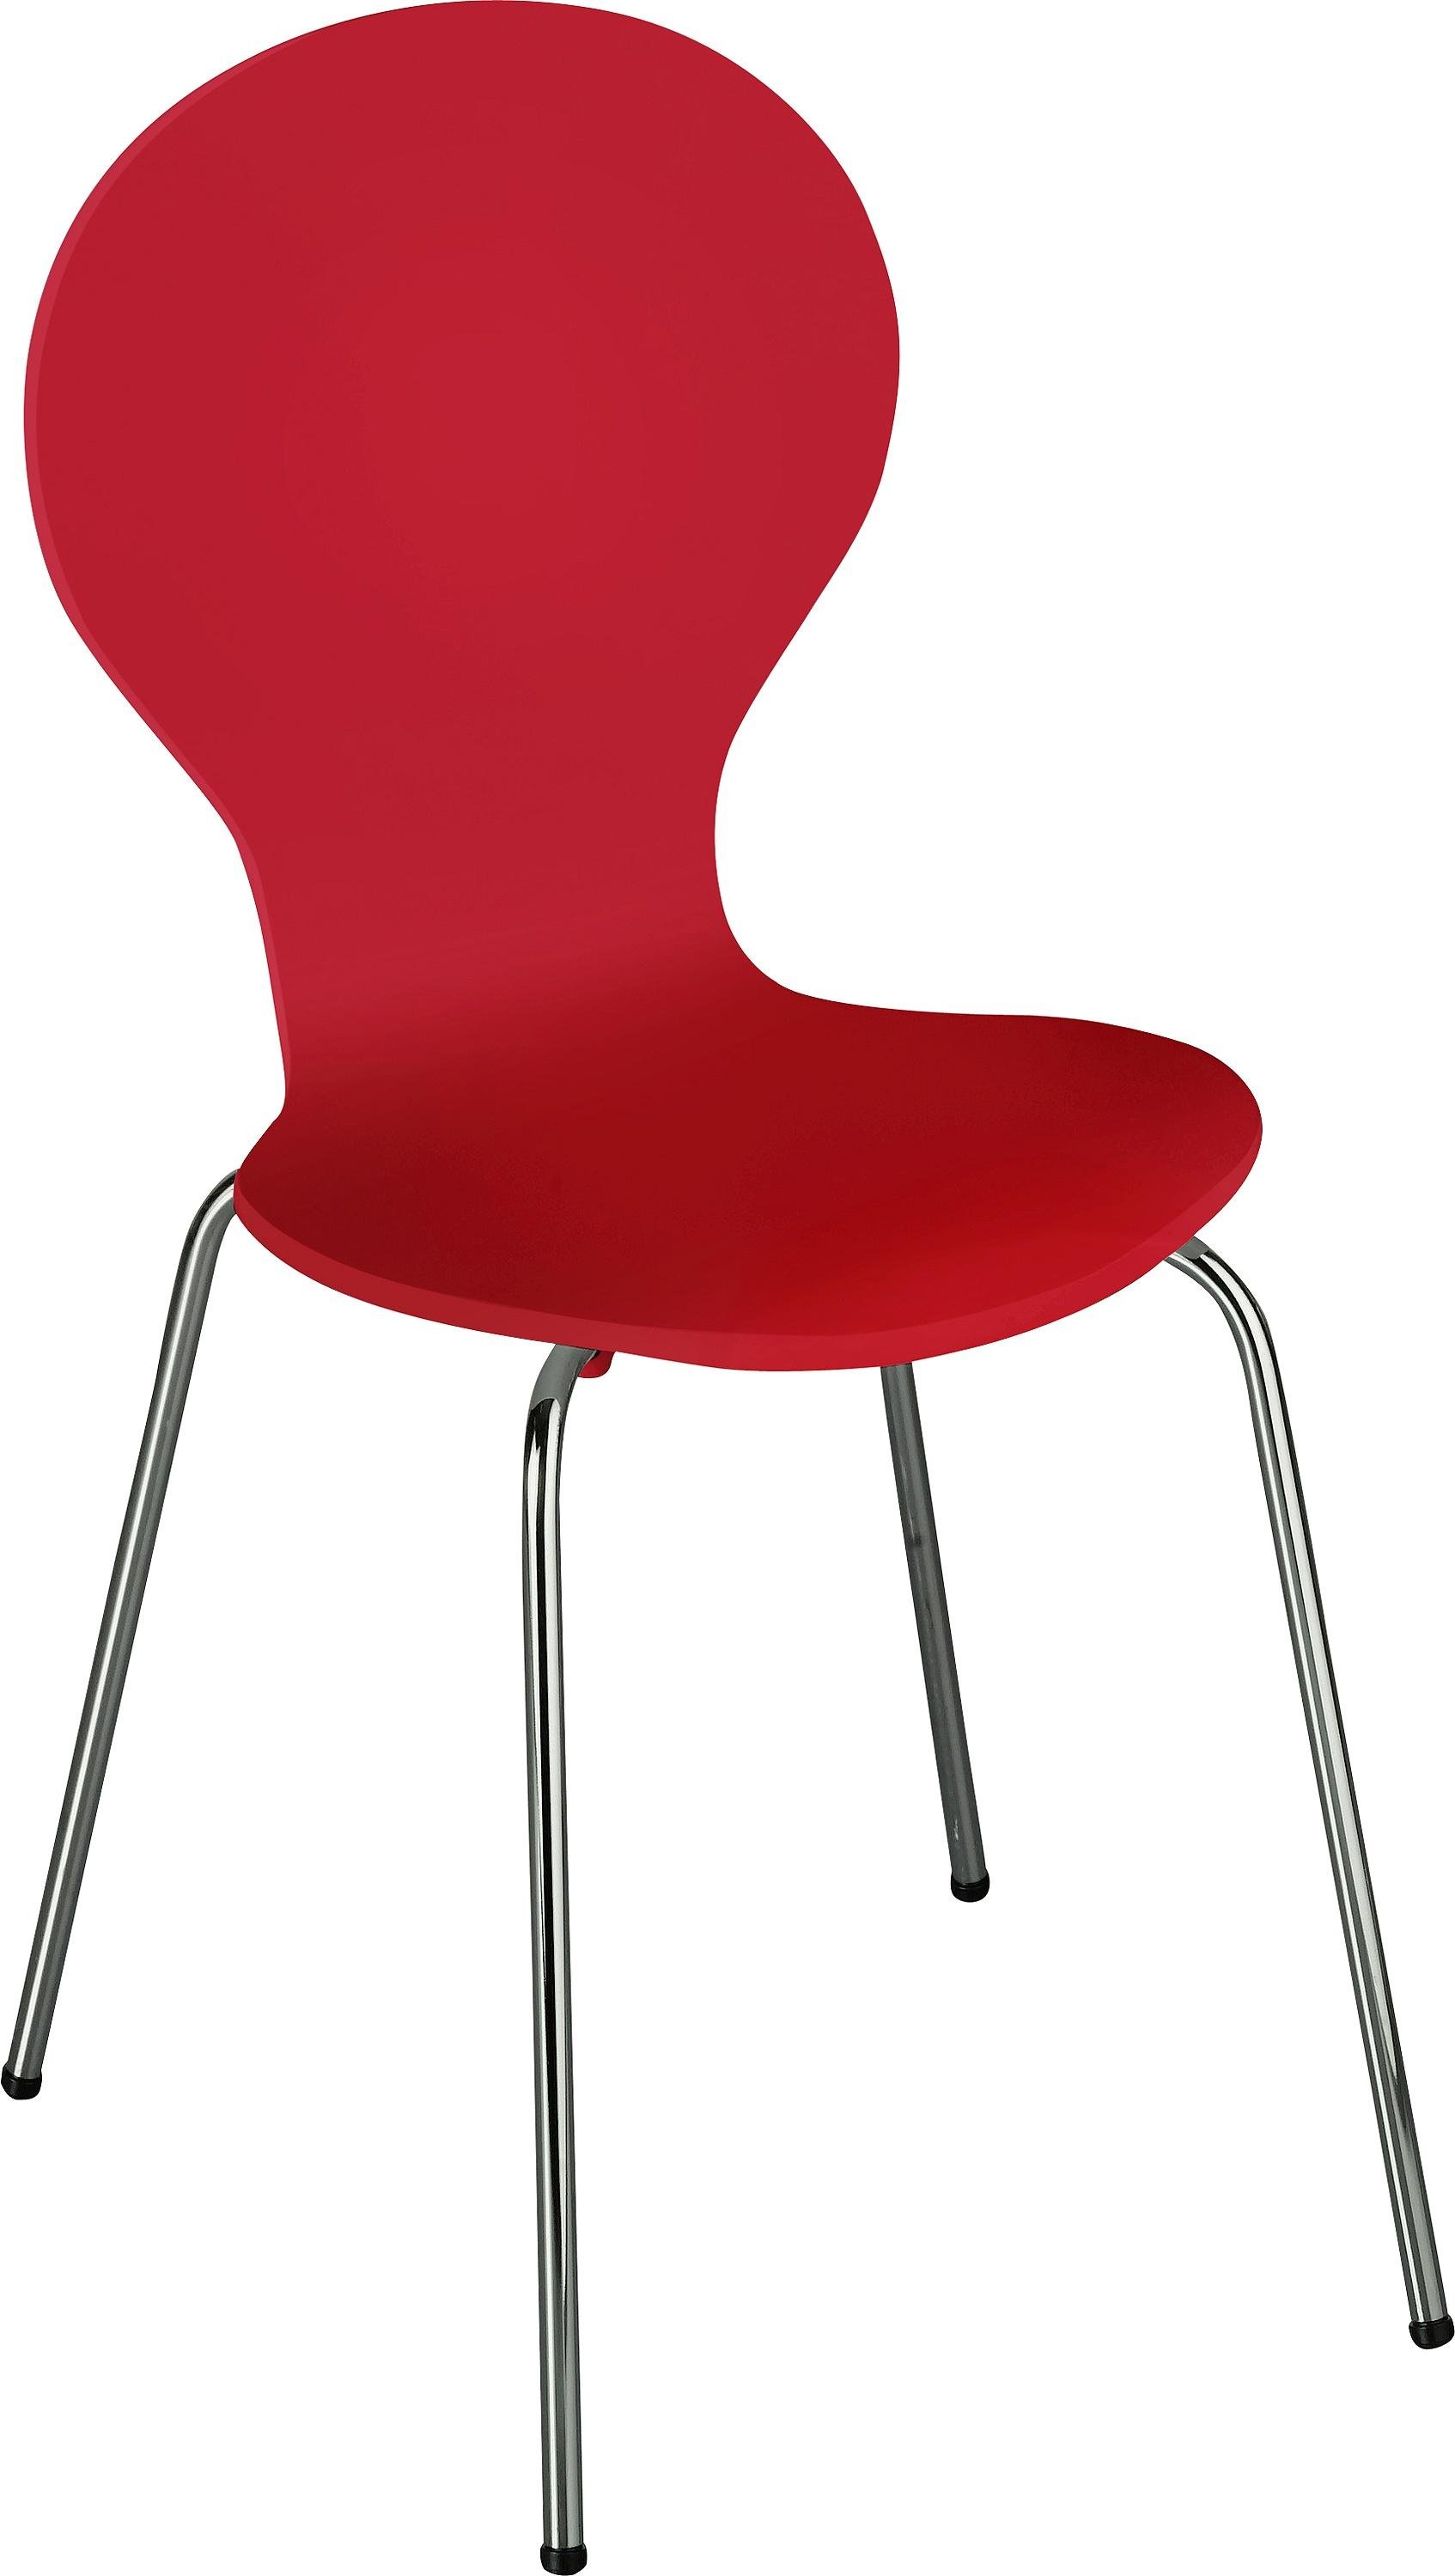 Argos Home Bentwood Dining Chair - Poppy Red